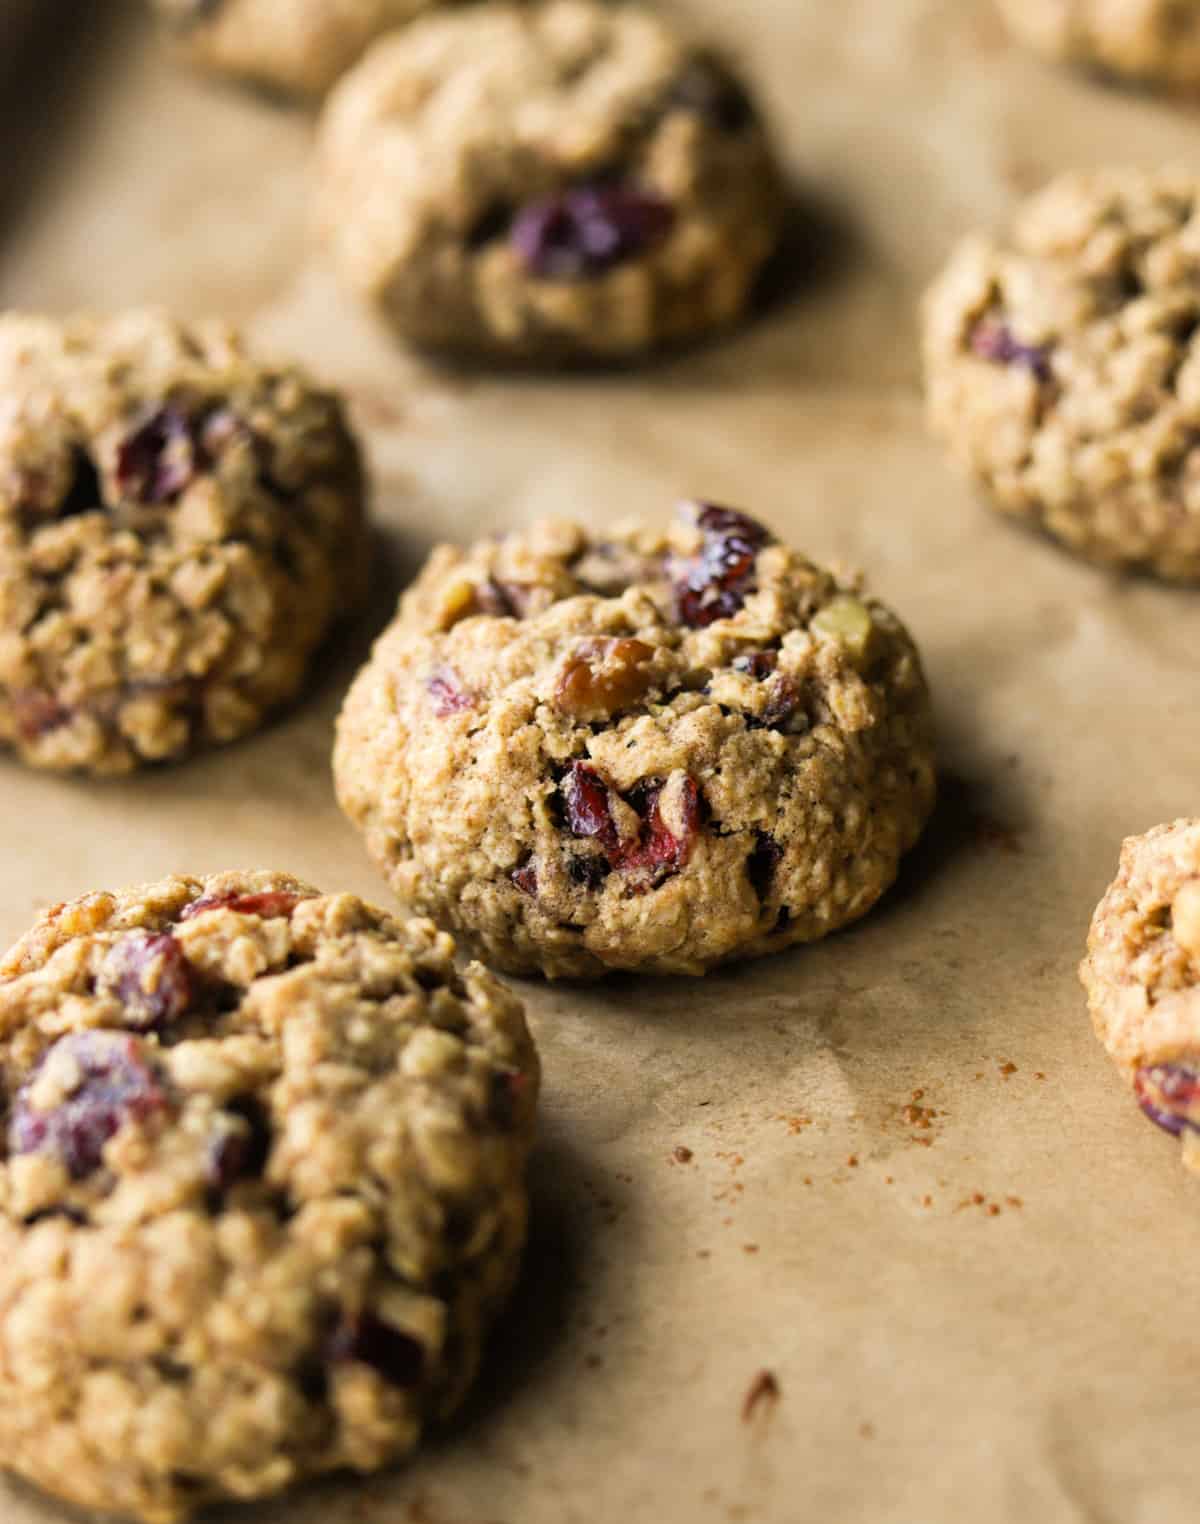 A side shot close up of an oatmeal cranberry walnut cookie.